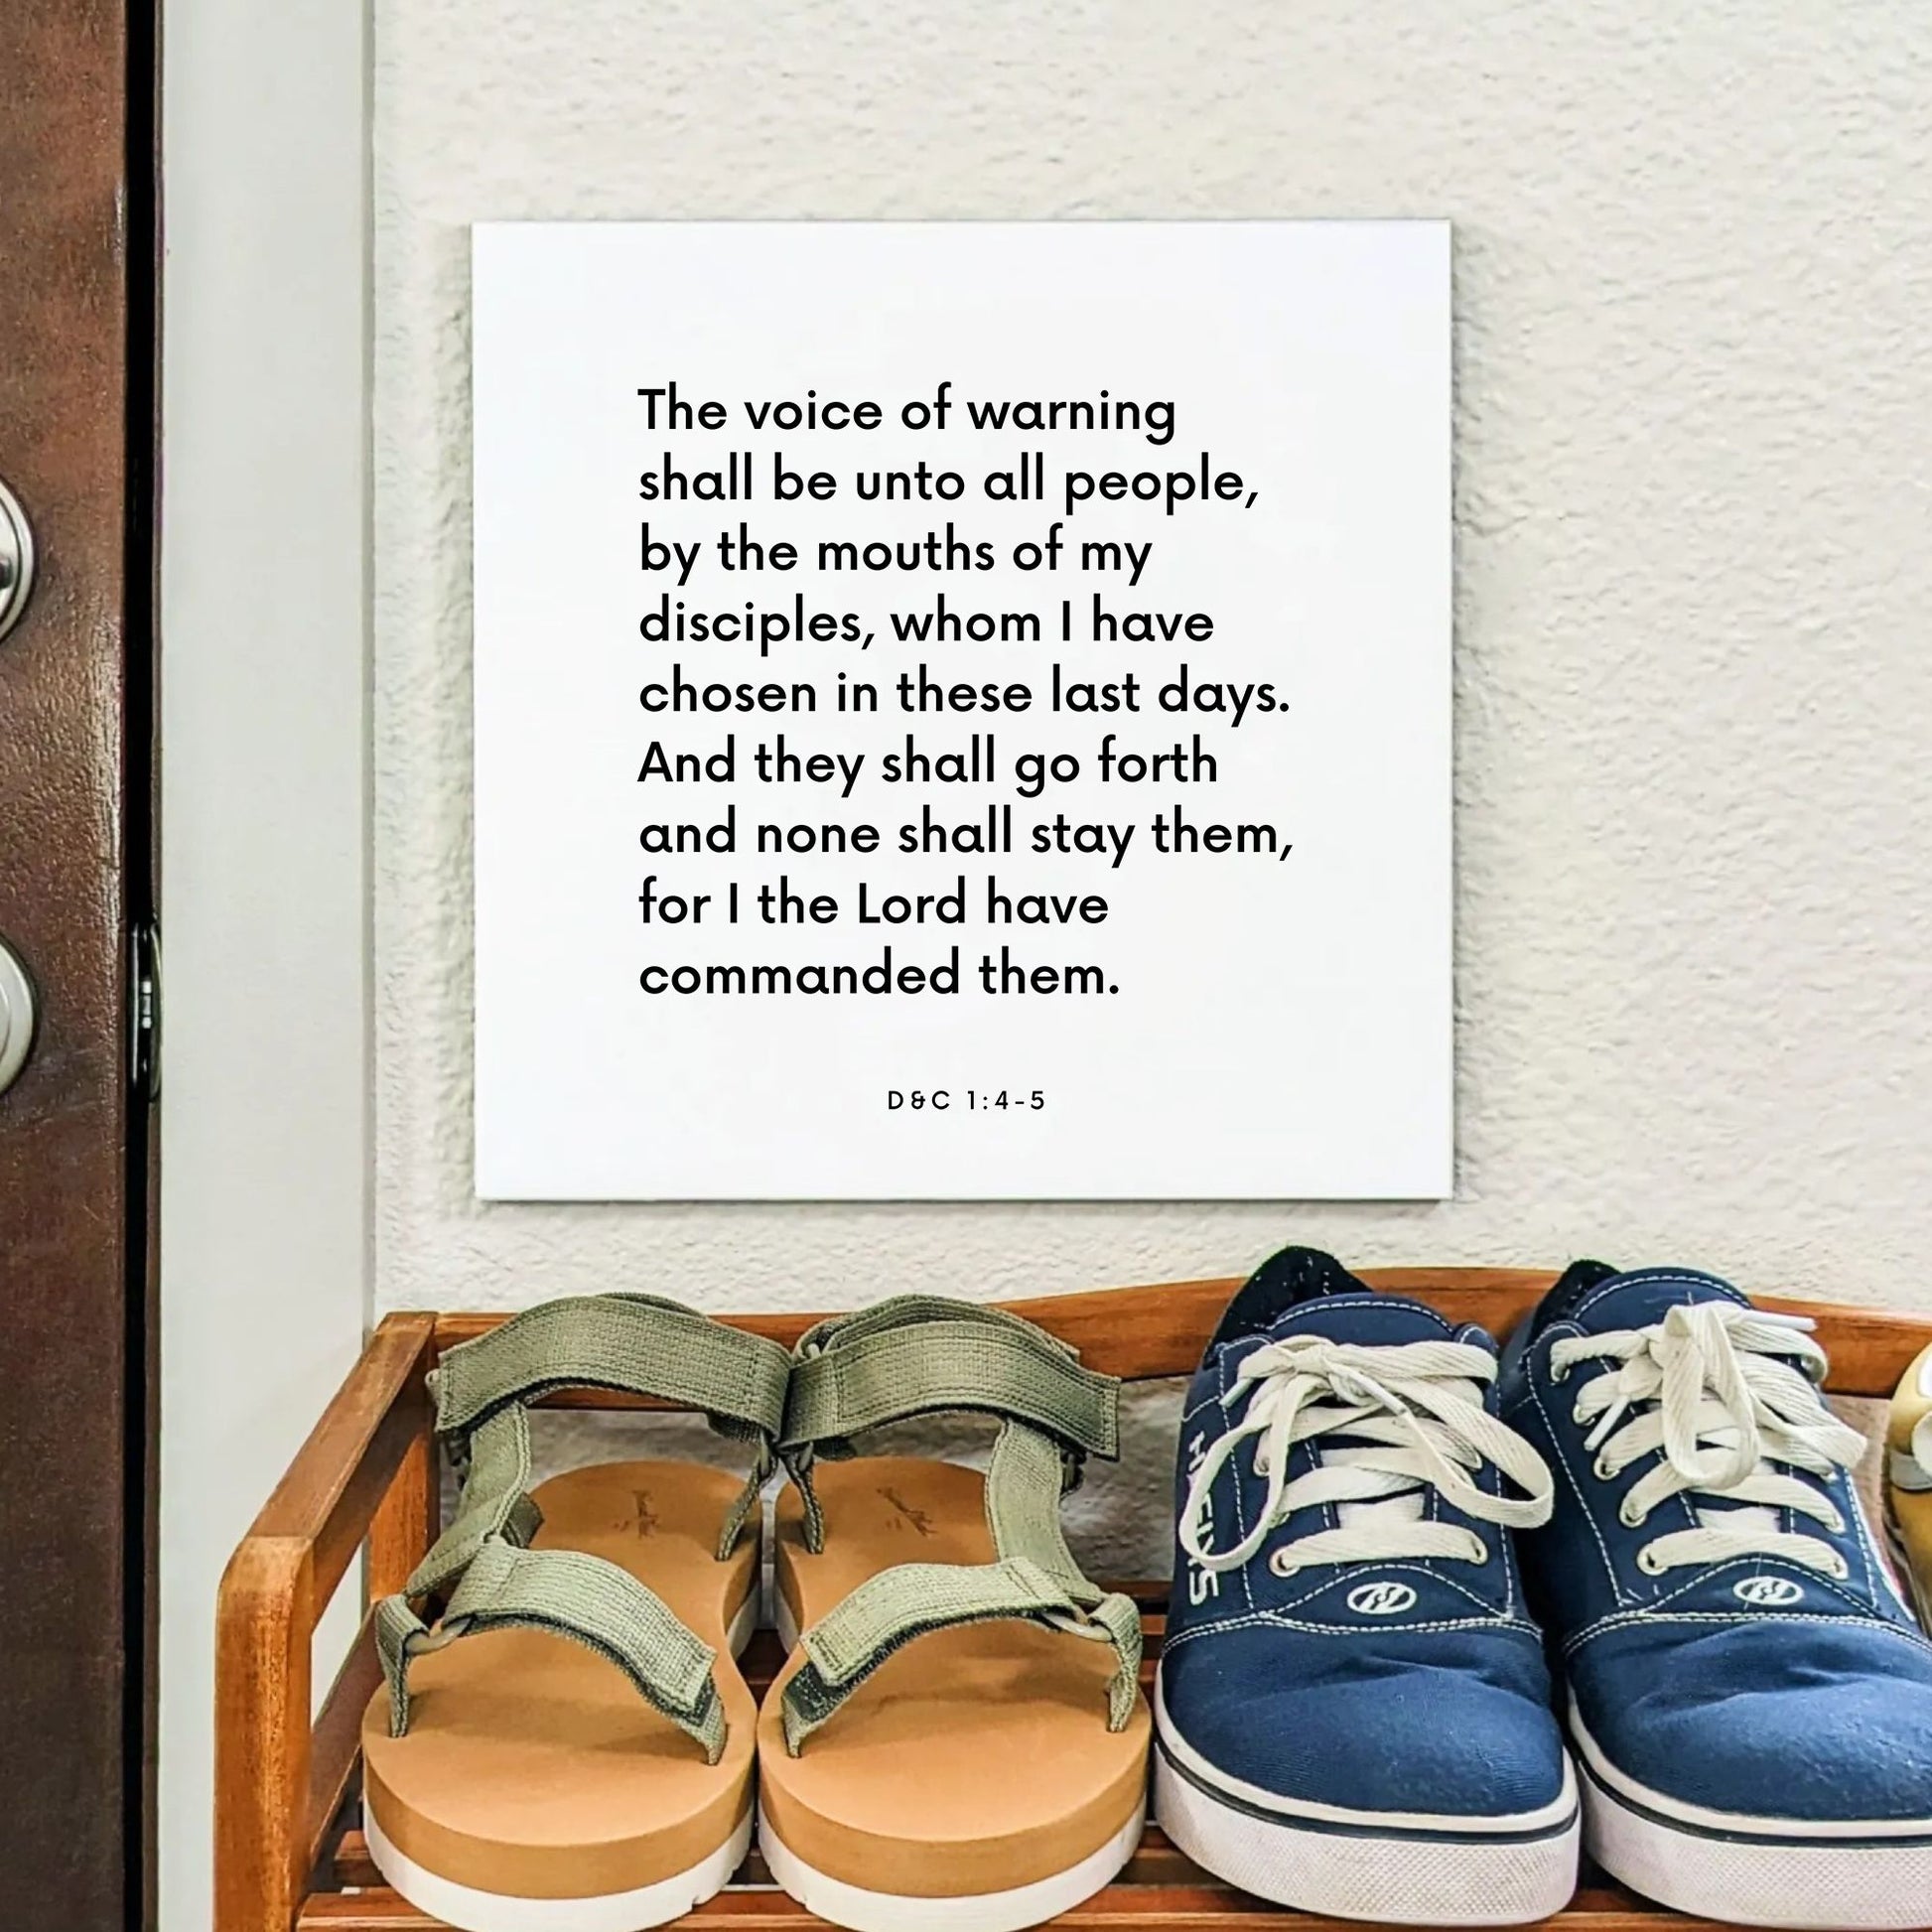 Shoes mouting of the scripture tile for D&C 1:4-5 - "The voice of warning shall be unto all people"